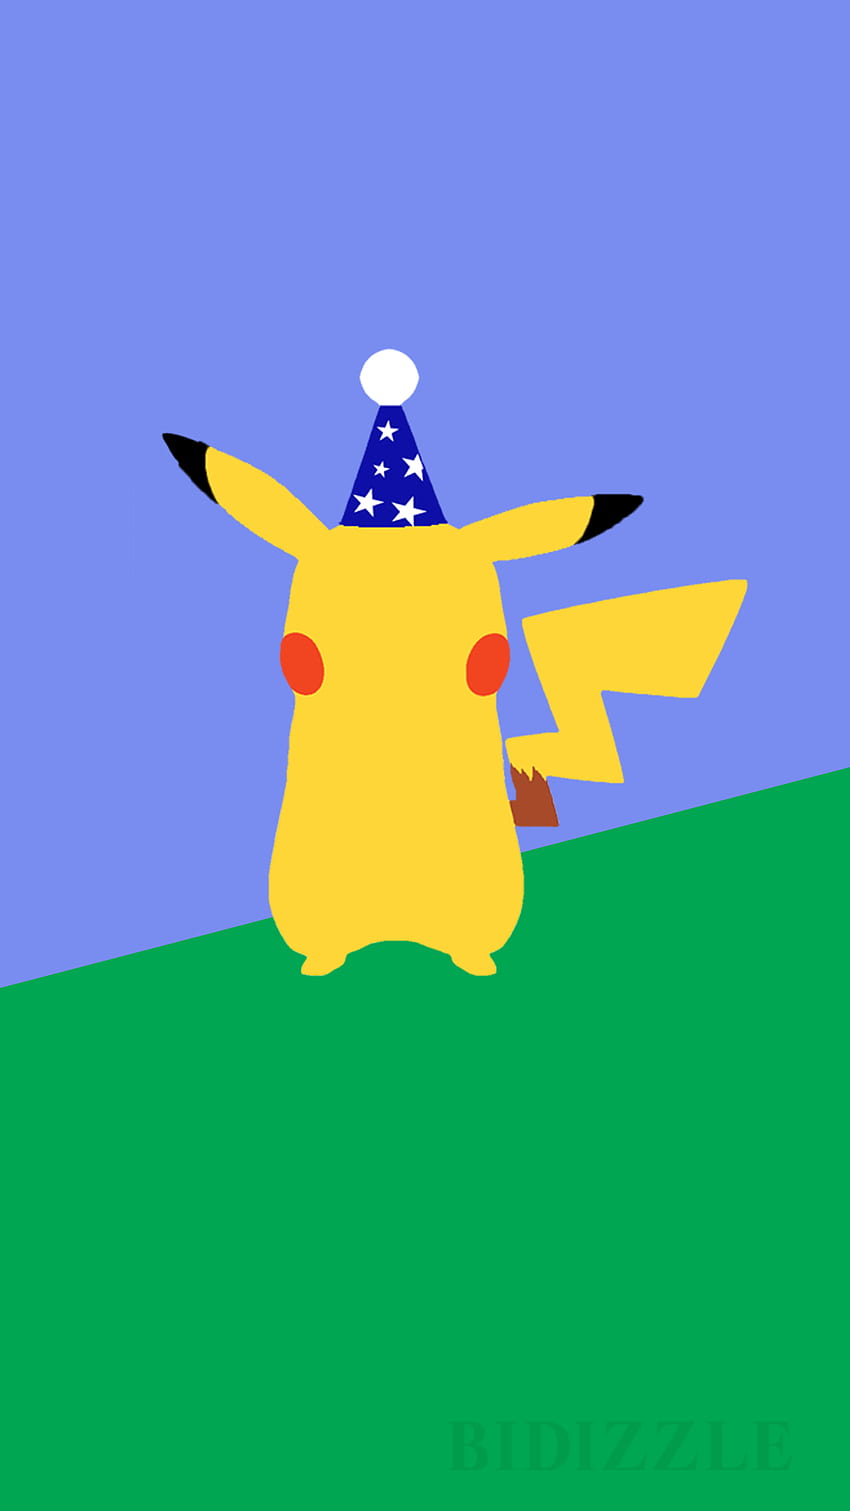 Been awhile since I've posted here, but I made this Pikachu Minimalist for myself and I thought I should share it too!. iPhone X - iPhone X HD phone wallpaper